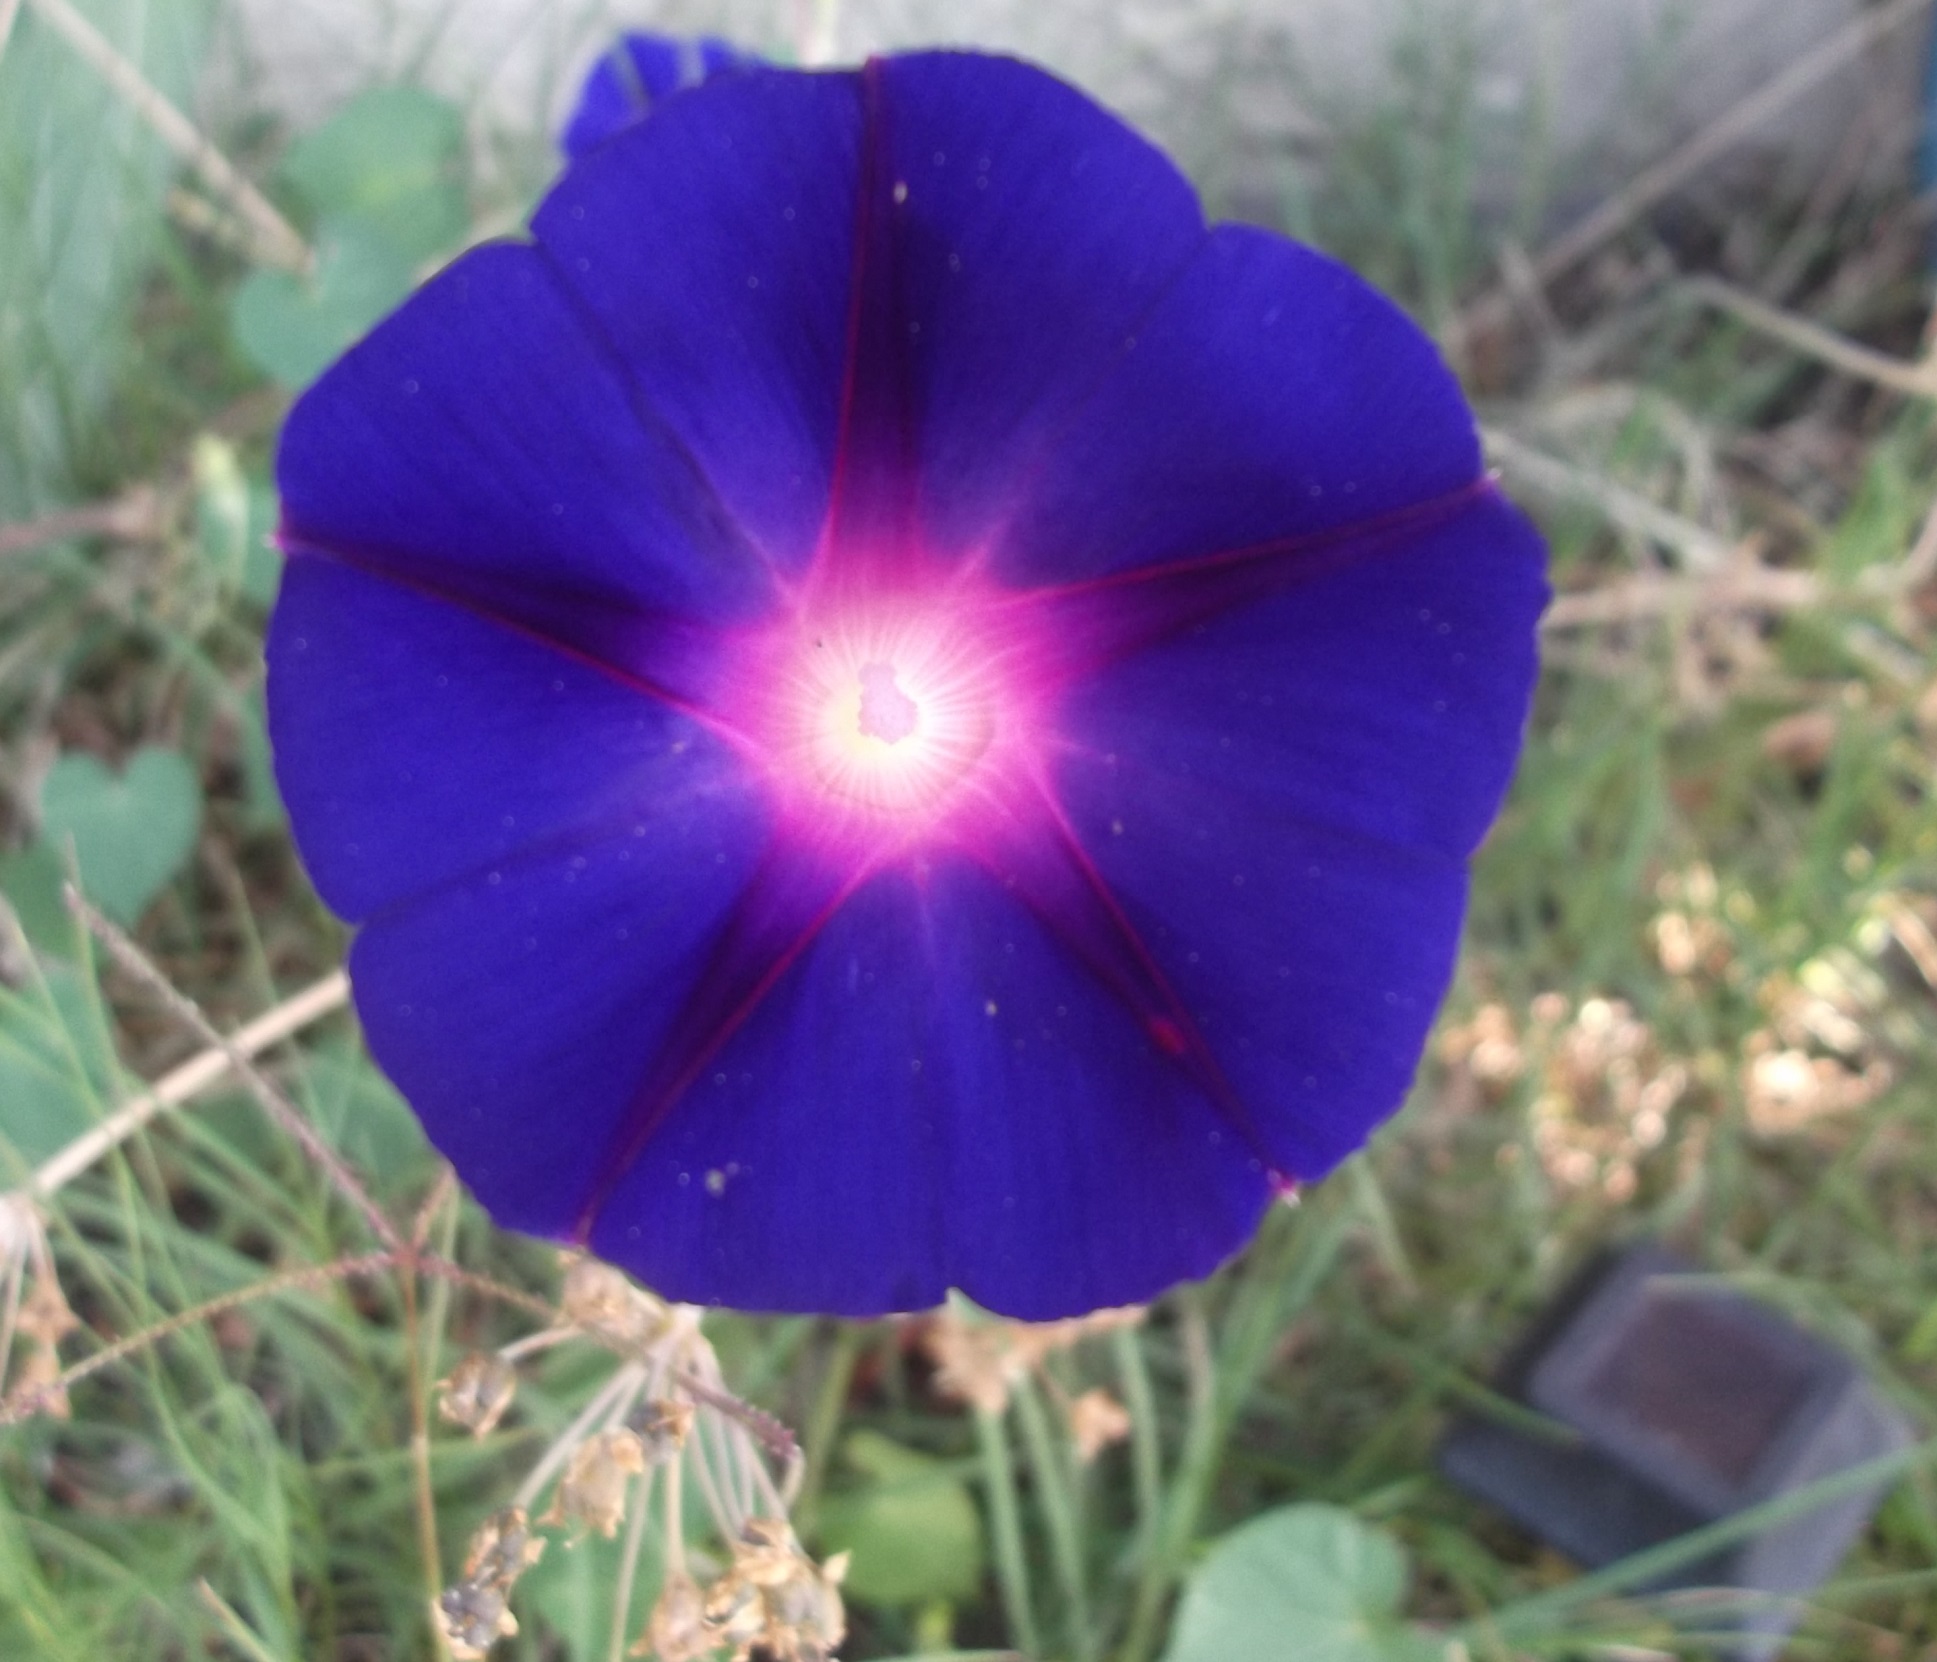 Photo I took of a morning glory that had crawled around to our front planter box.